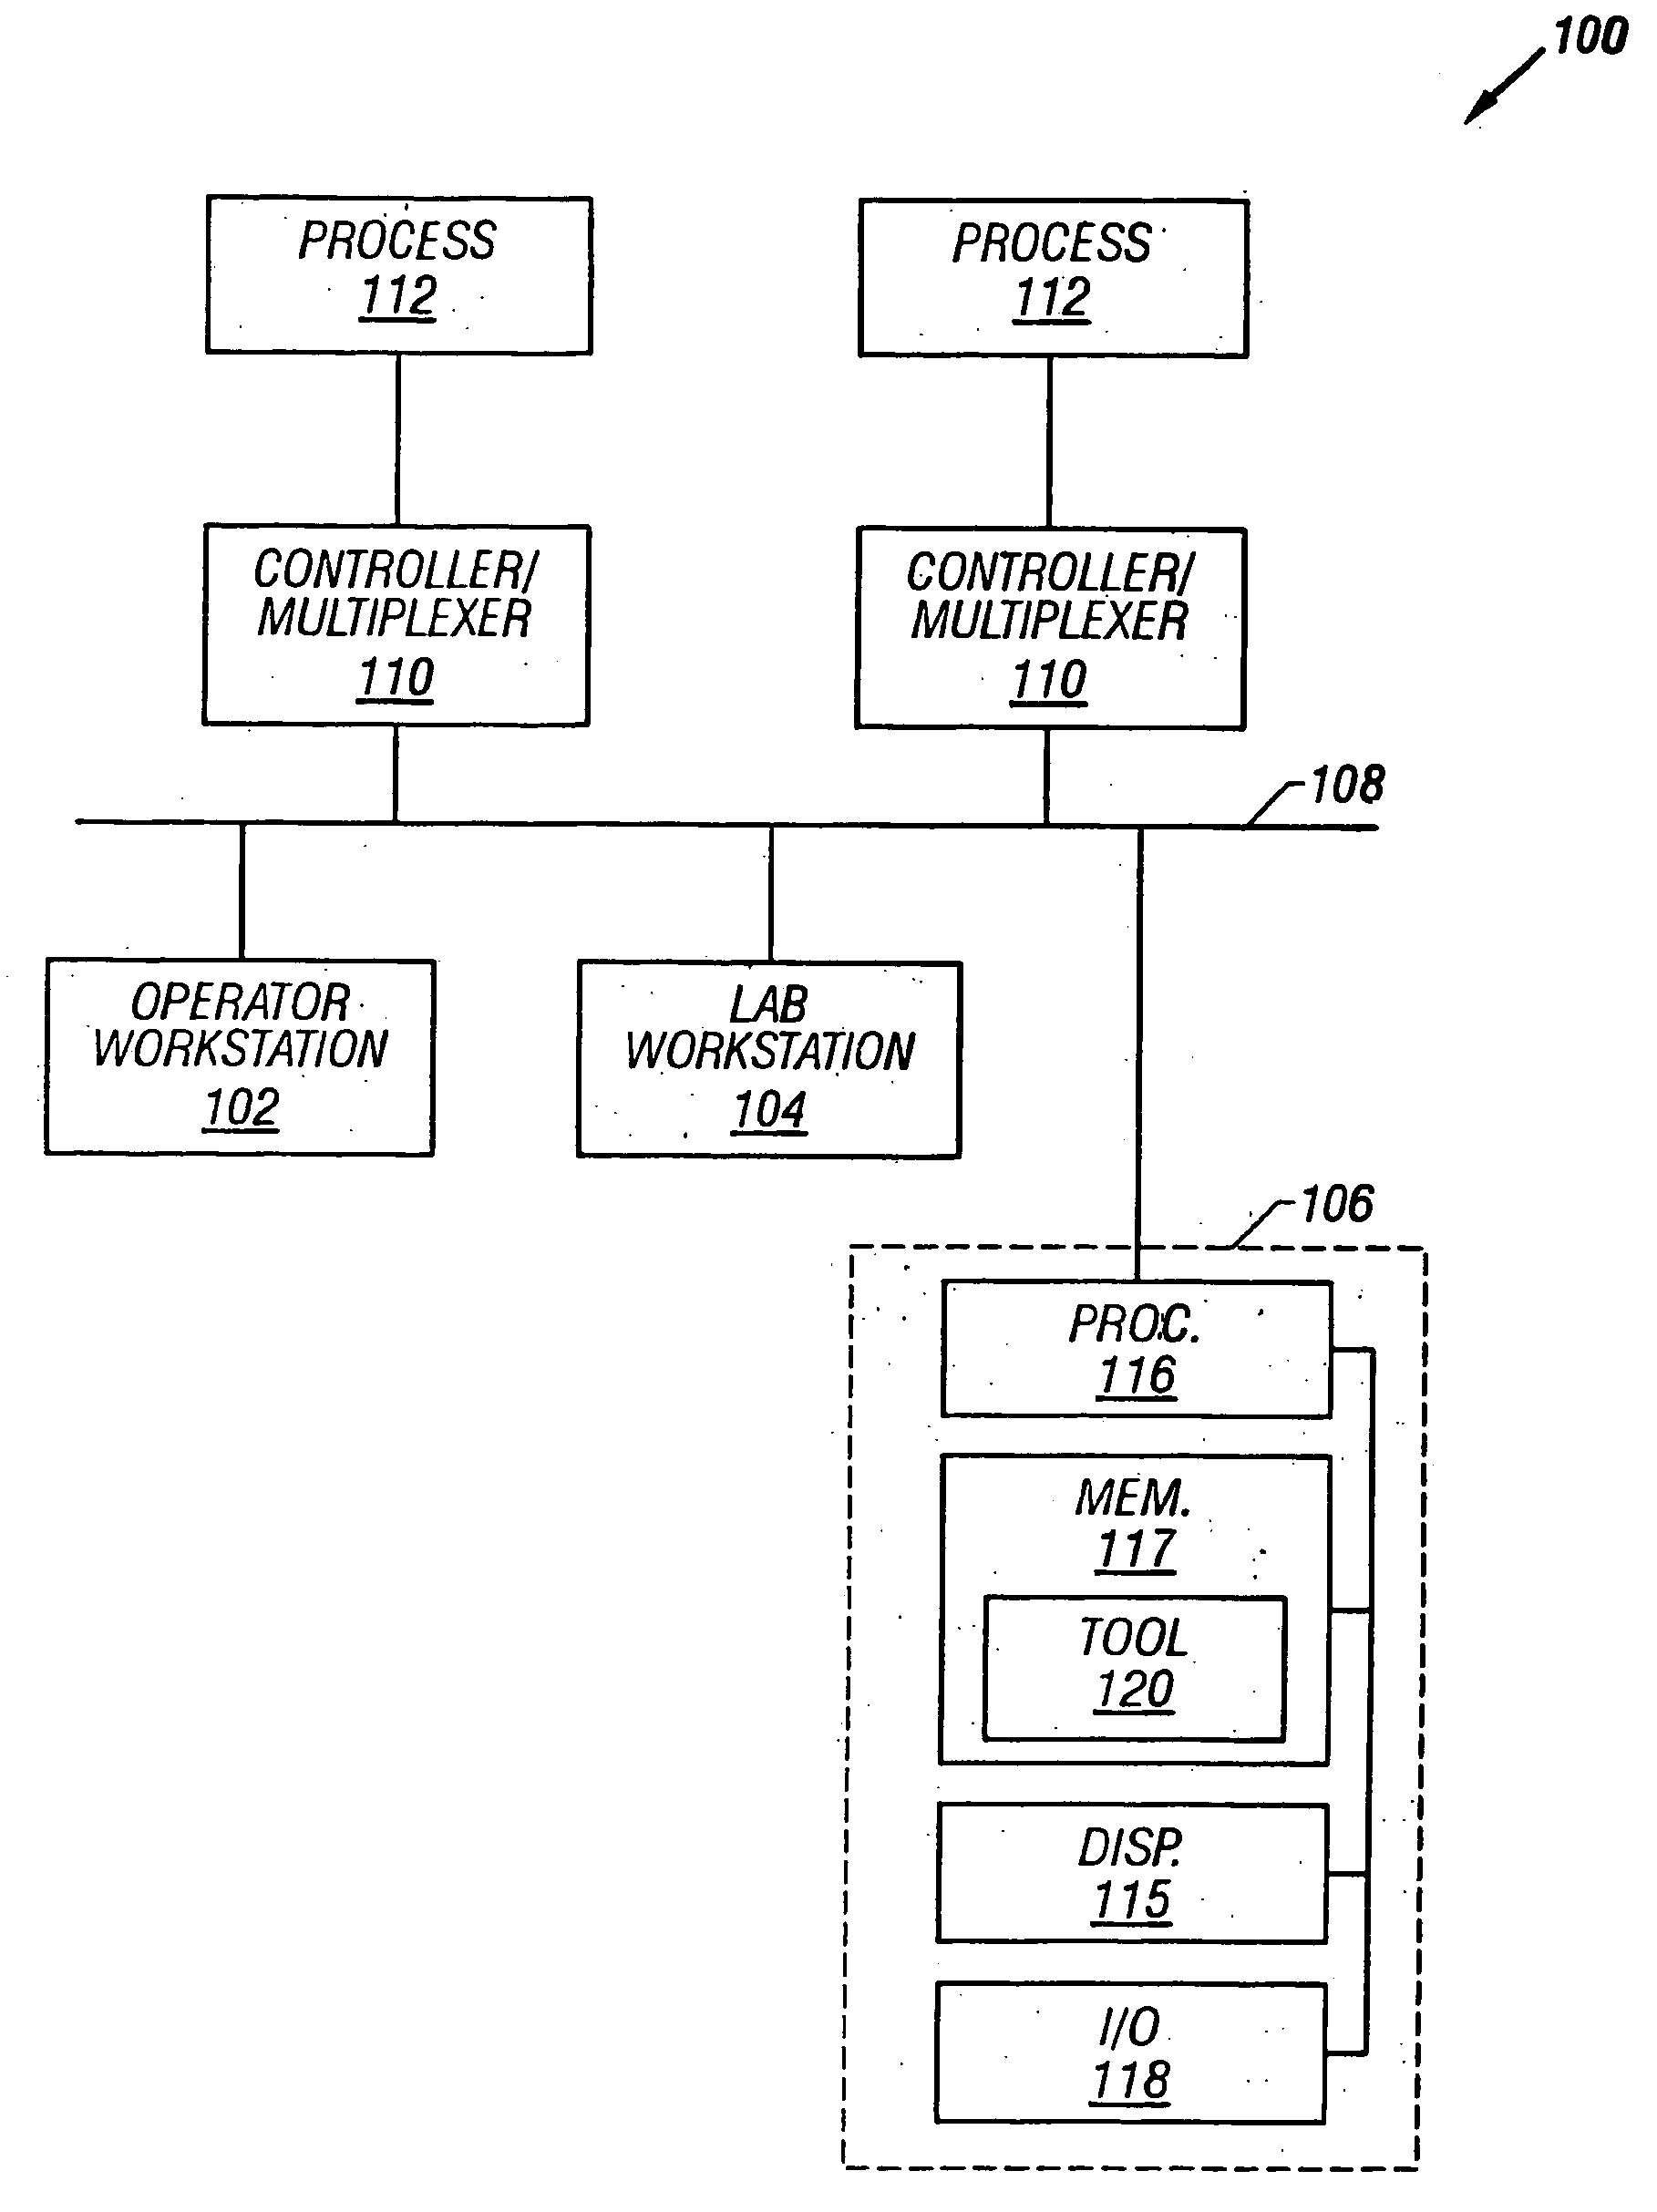 Enhanced tool for managing a process control network